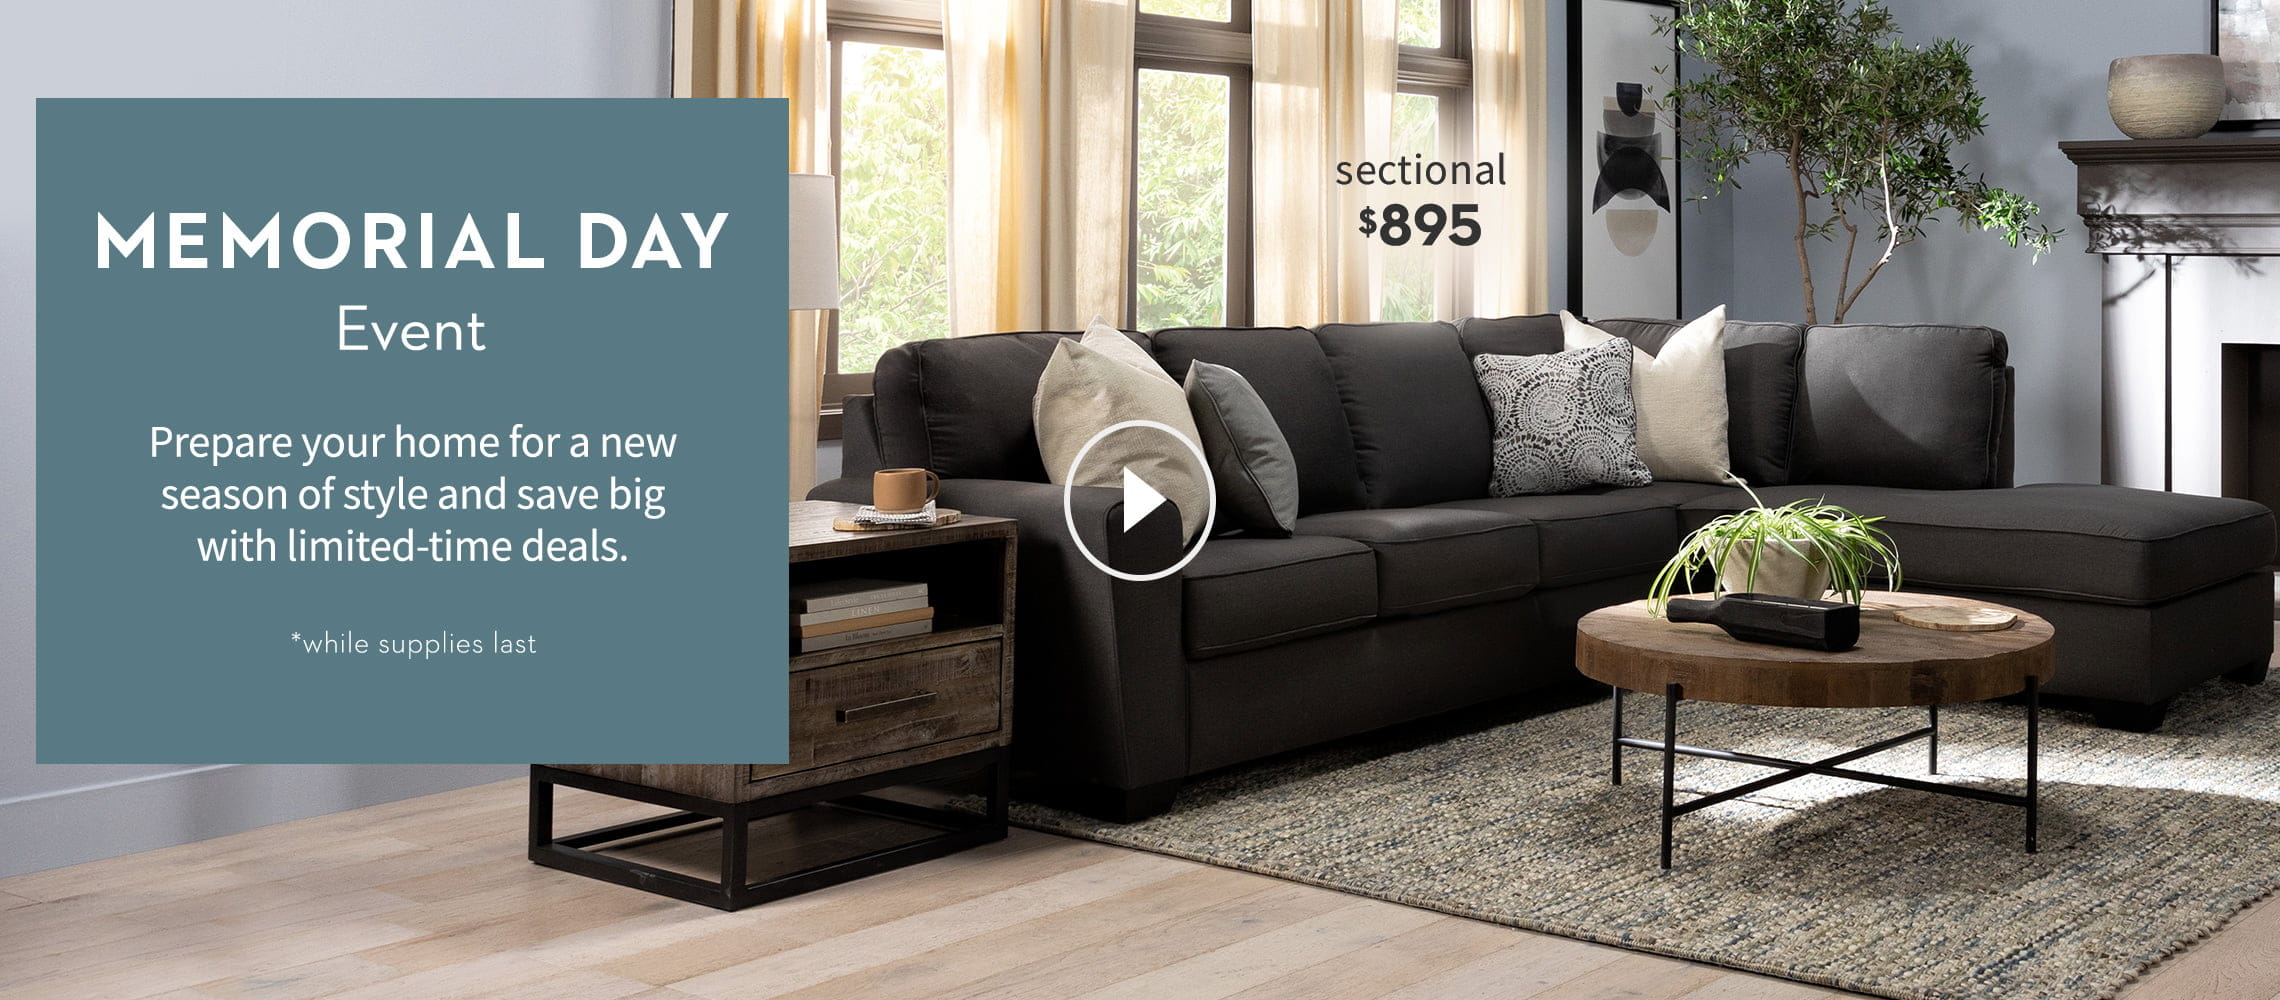 Memorial Day Event. Prepare your home for a new season of style and save big with limited-time deals. *while supplies last